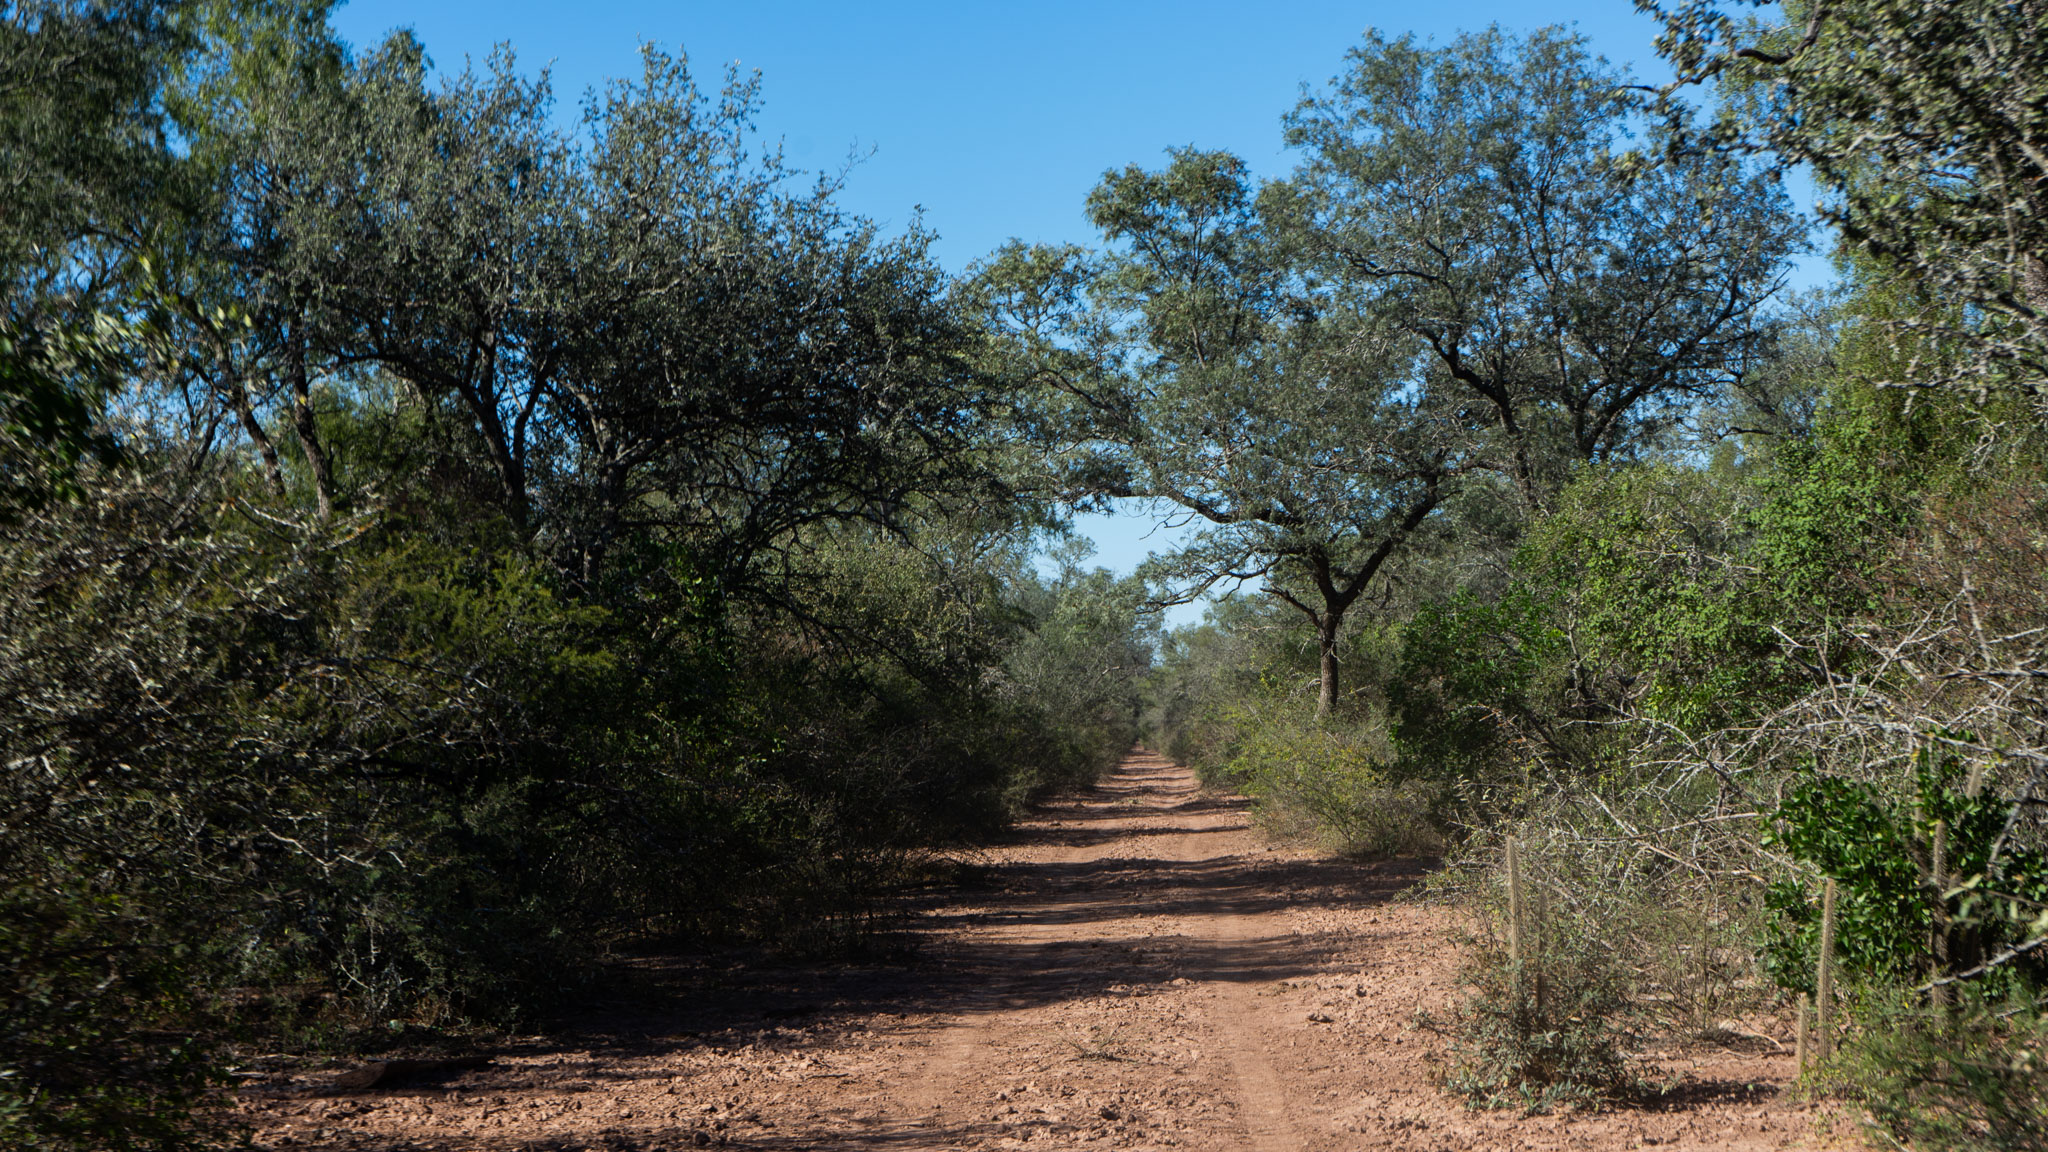 The Gran Chaco forest